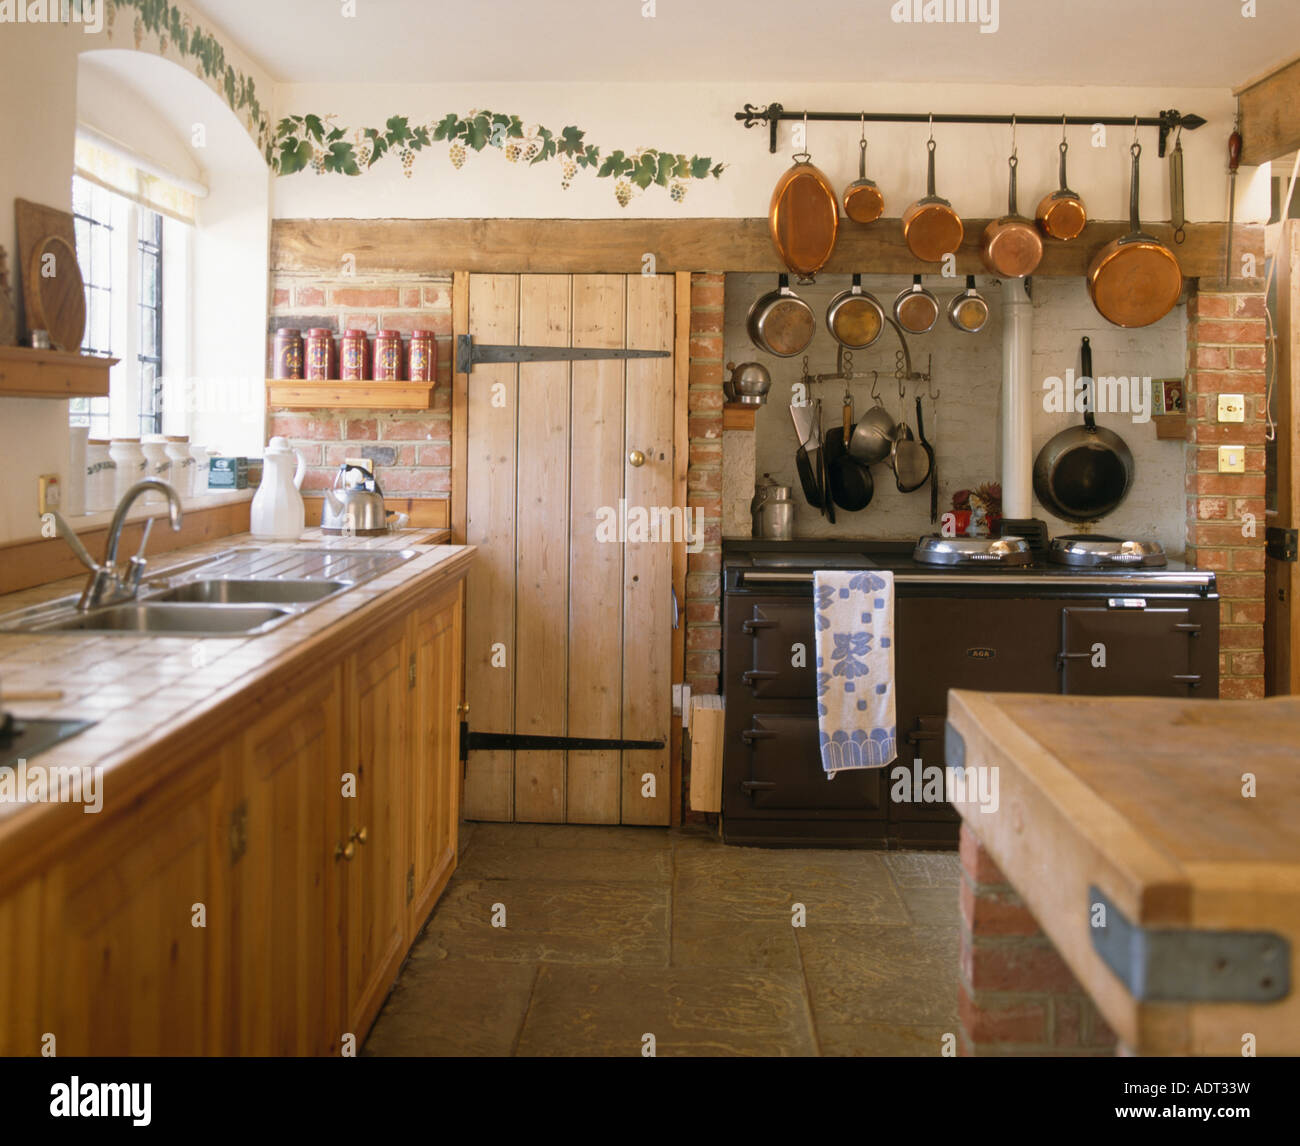 Content in a Cottage: Country Kitchen w/ Copper Pots